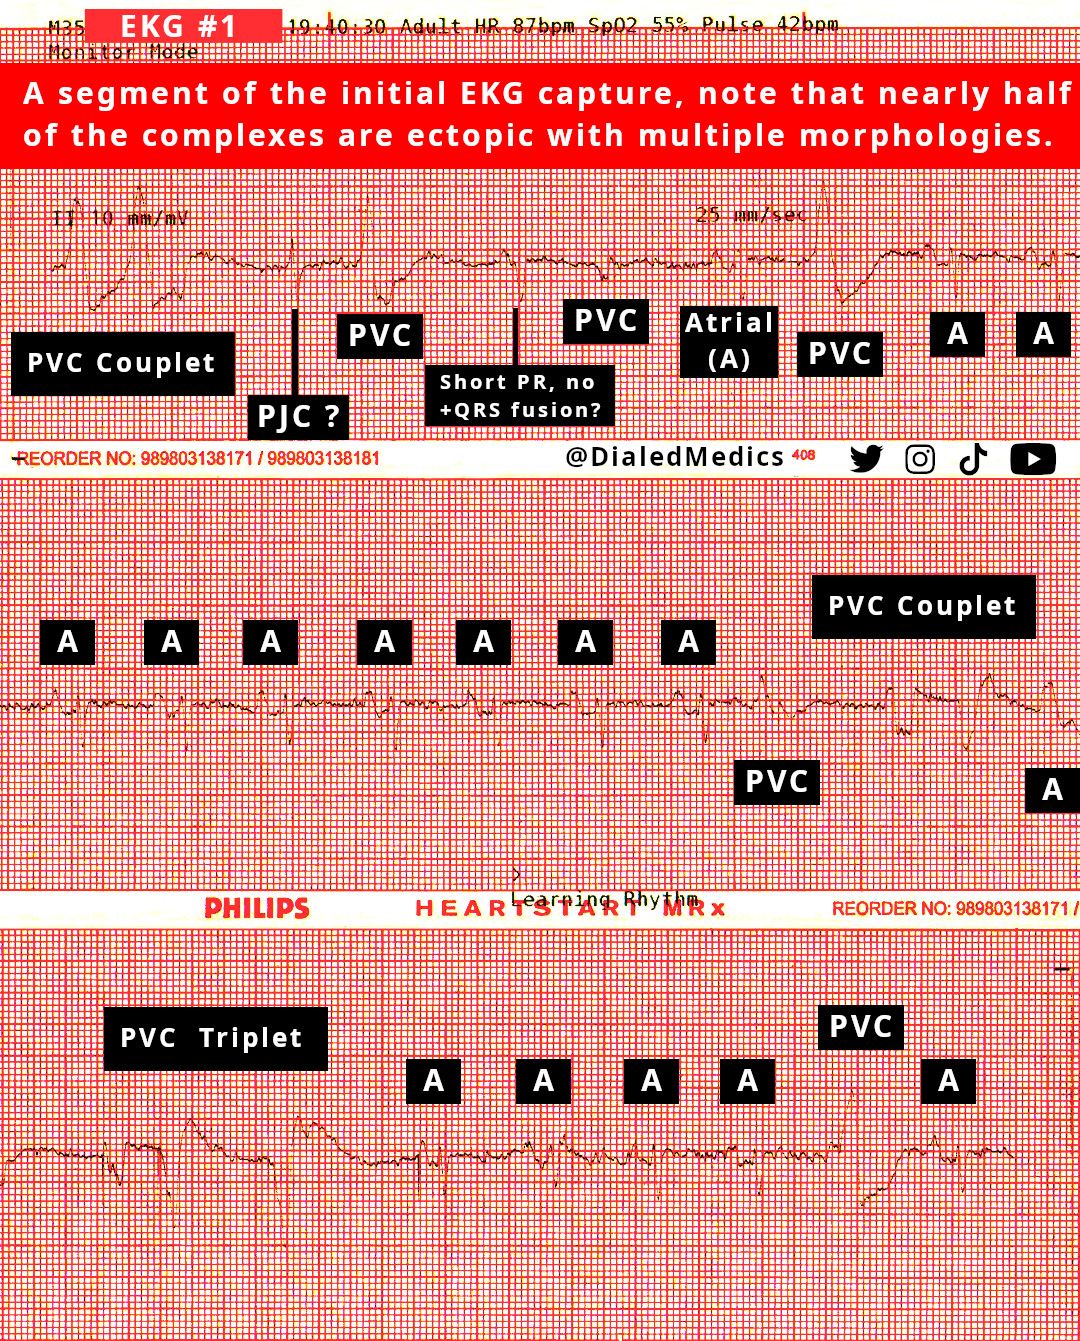 EKG #1 showing the pre-arrest period. Sinus rhythm with significant amounts of non-conducting polymorphic ventricular contractions.